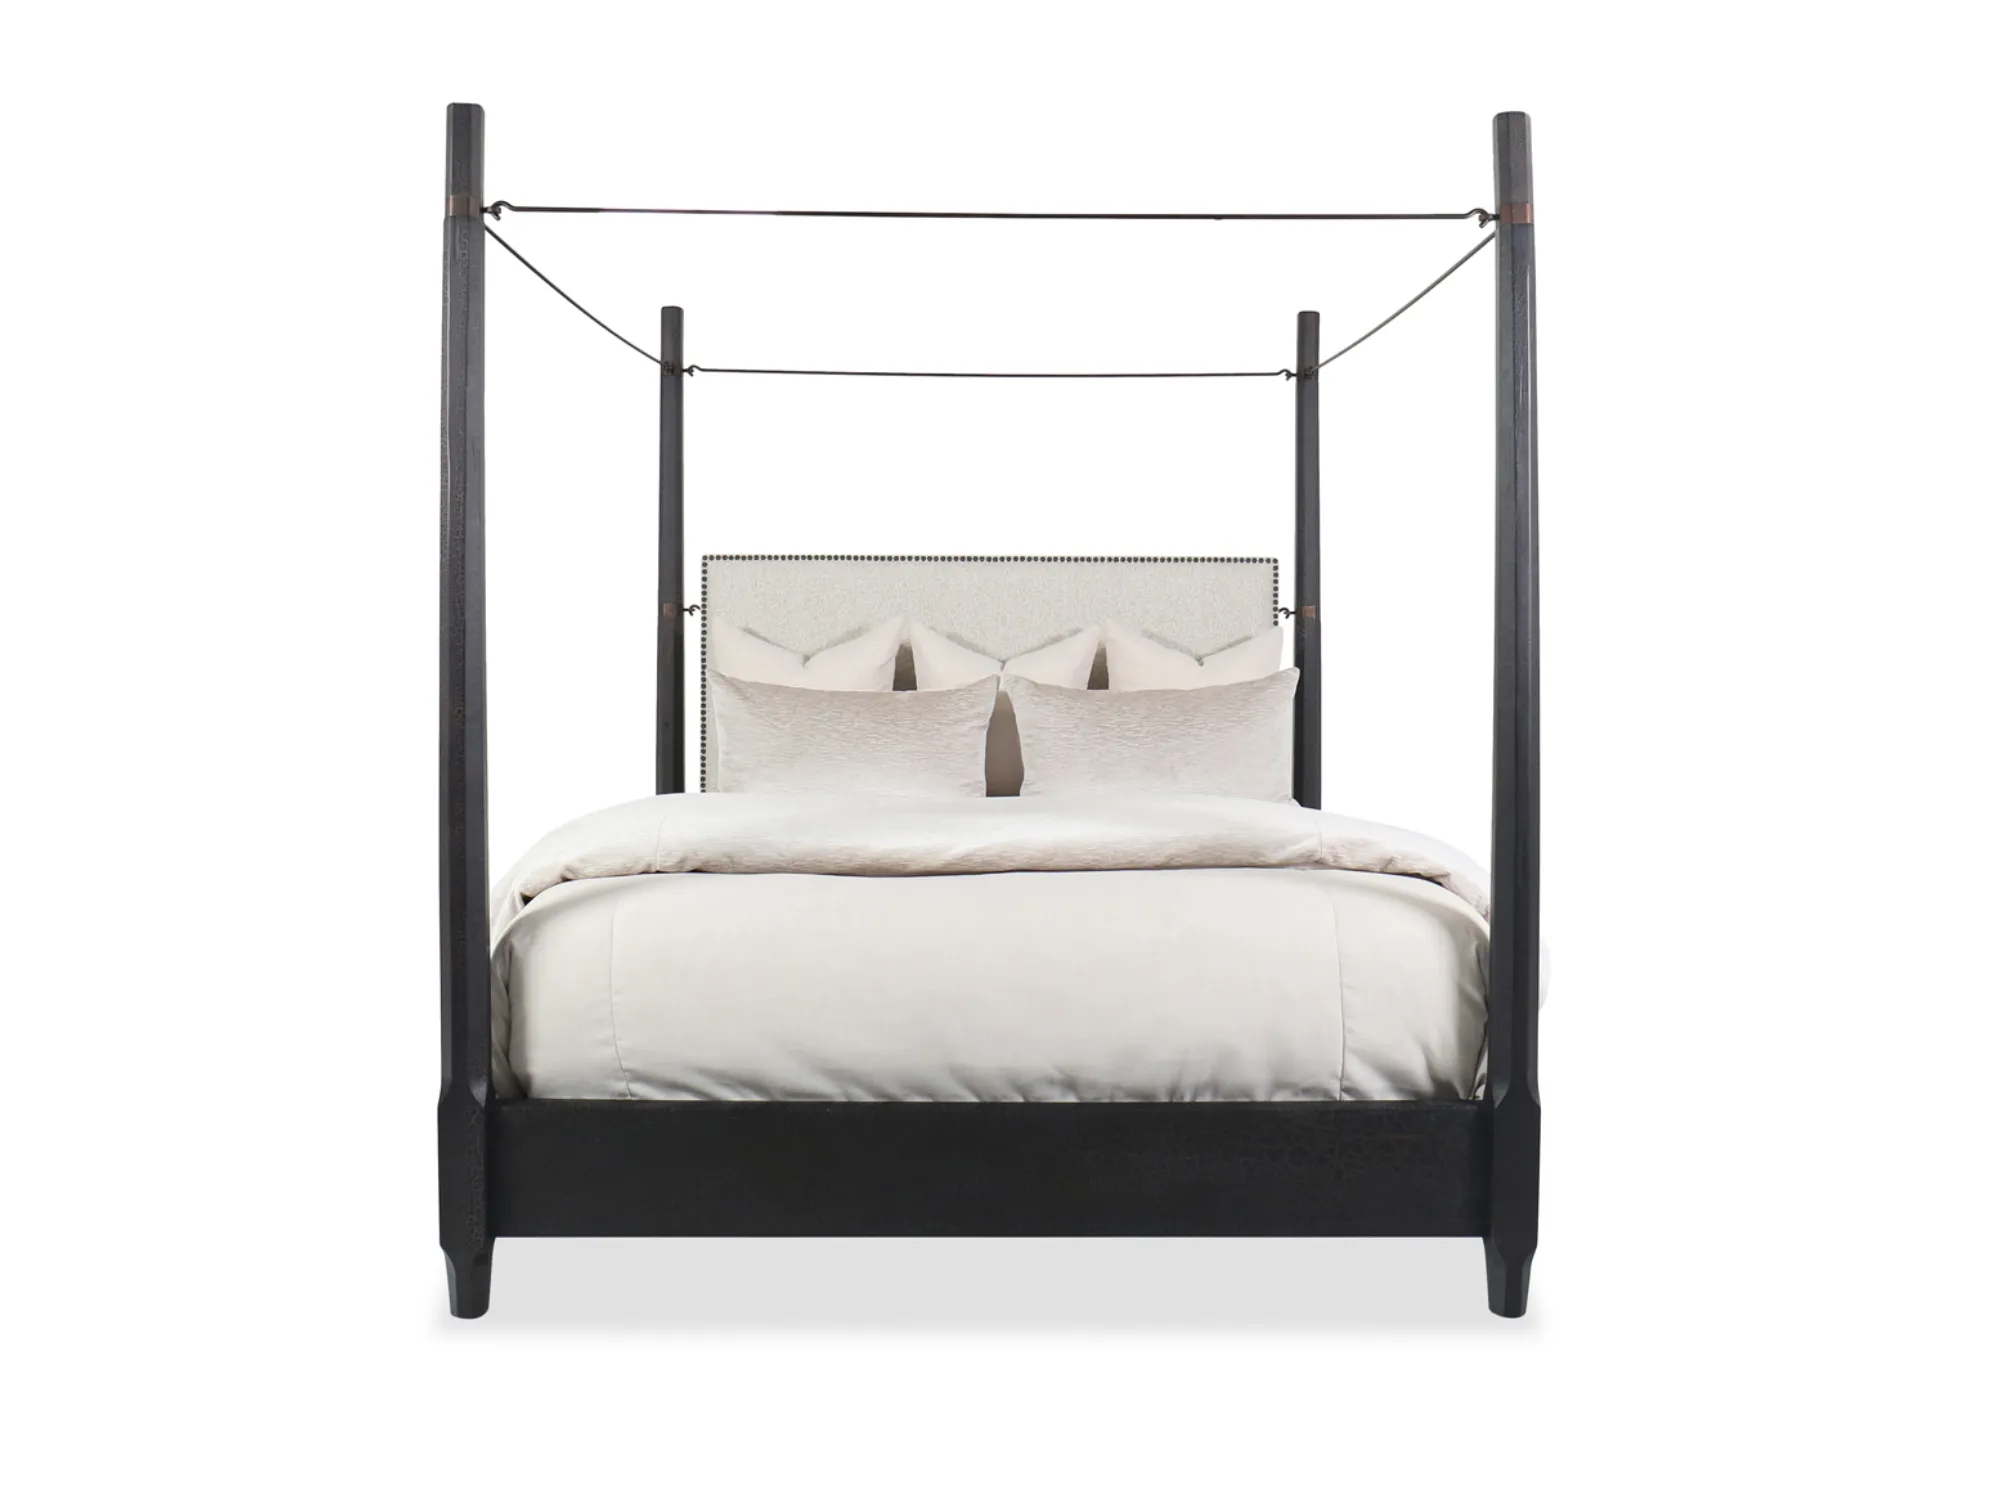 Big Sky Cal King Poster Bed with Canopy